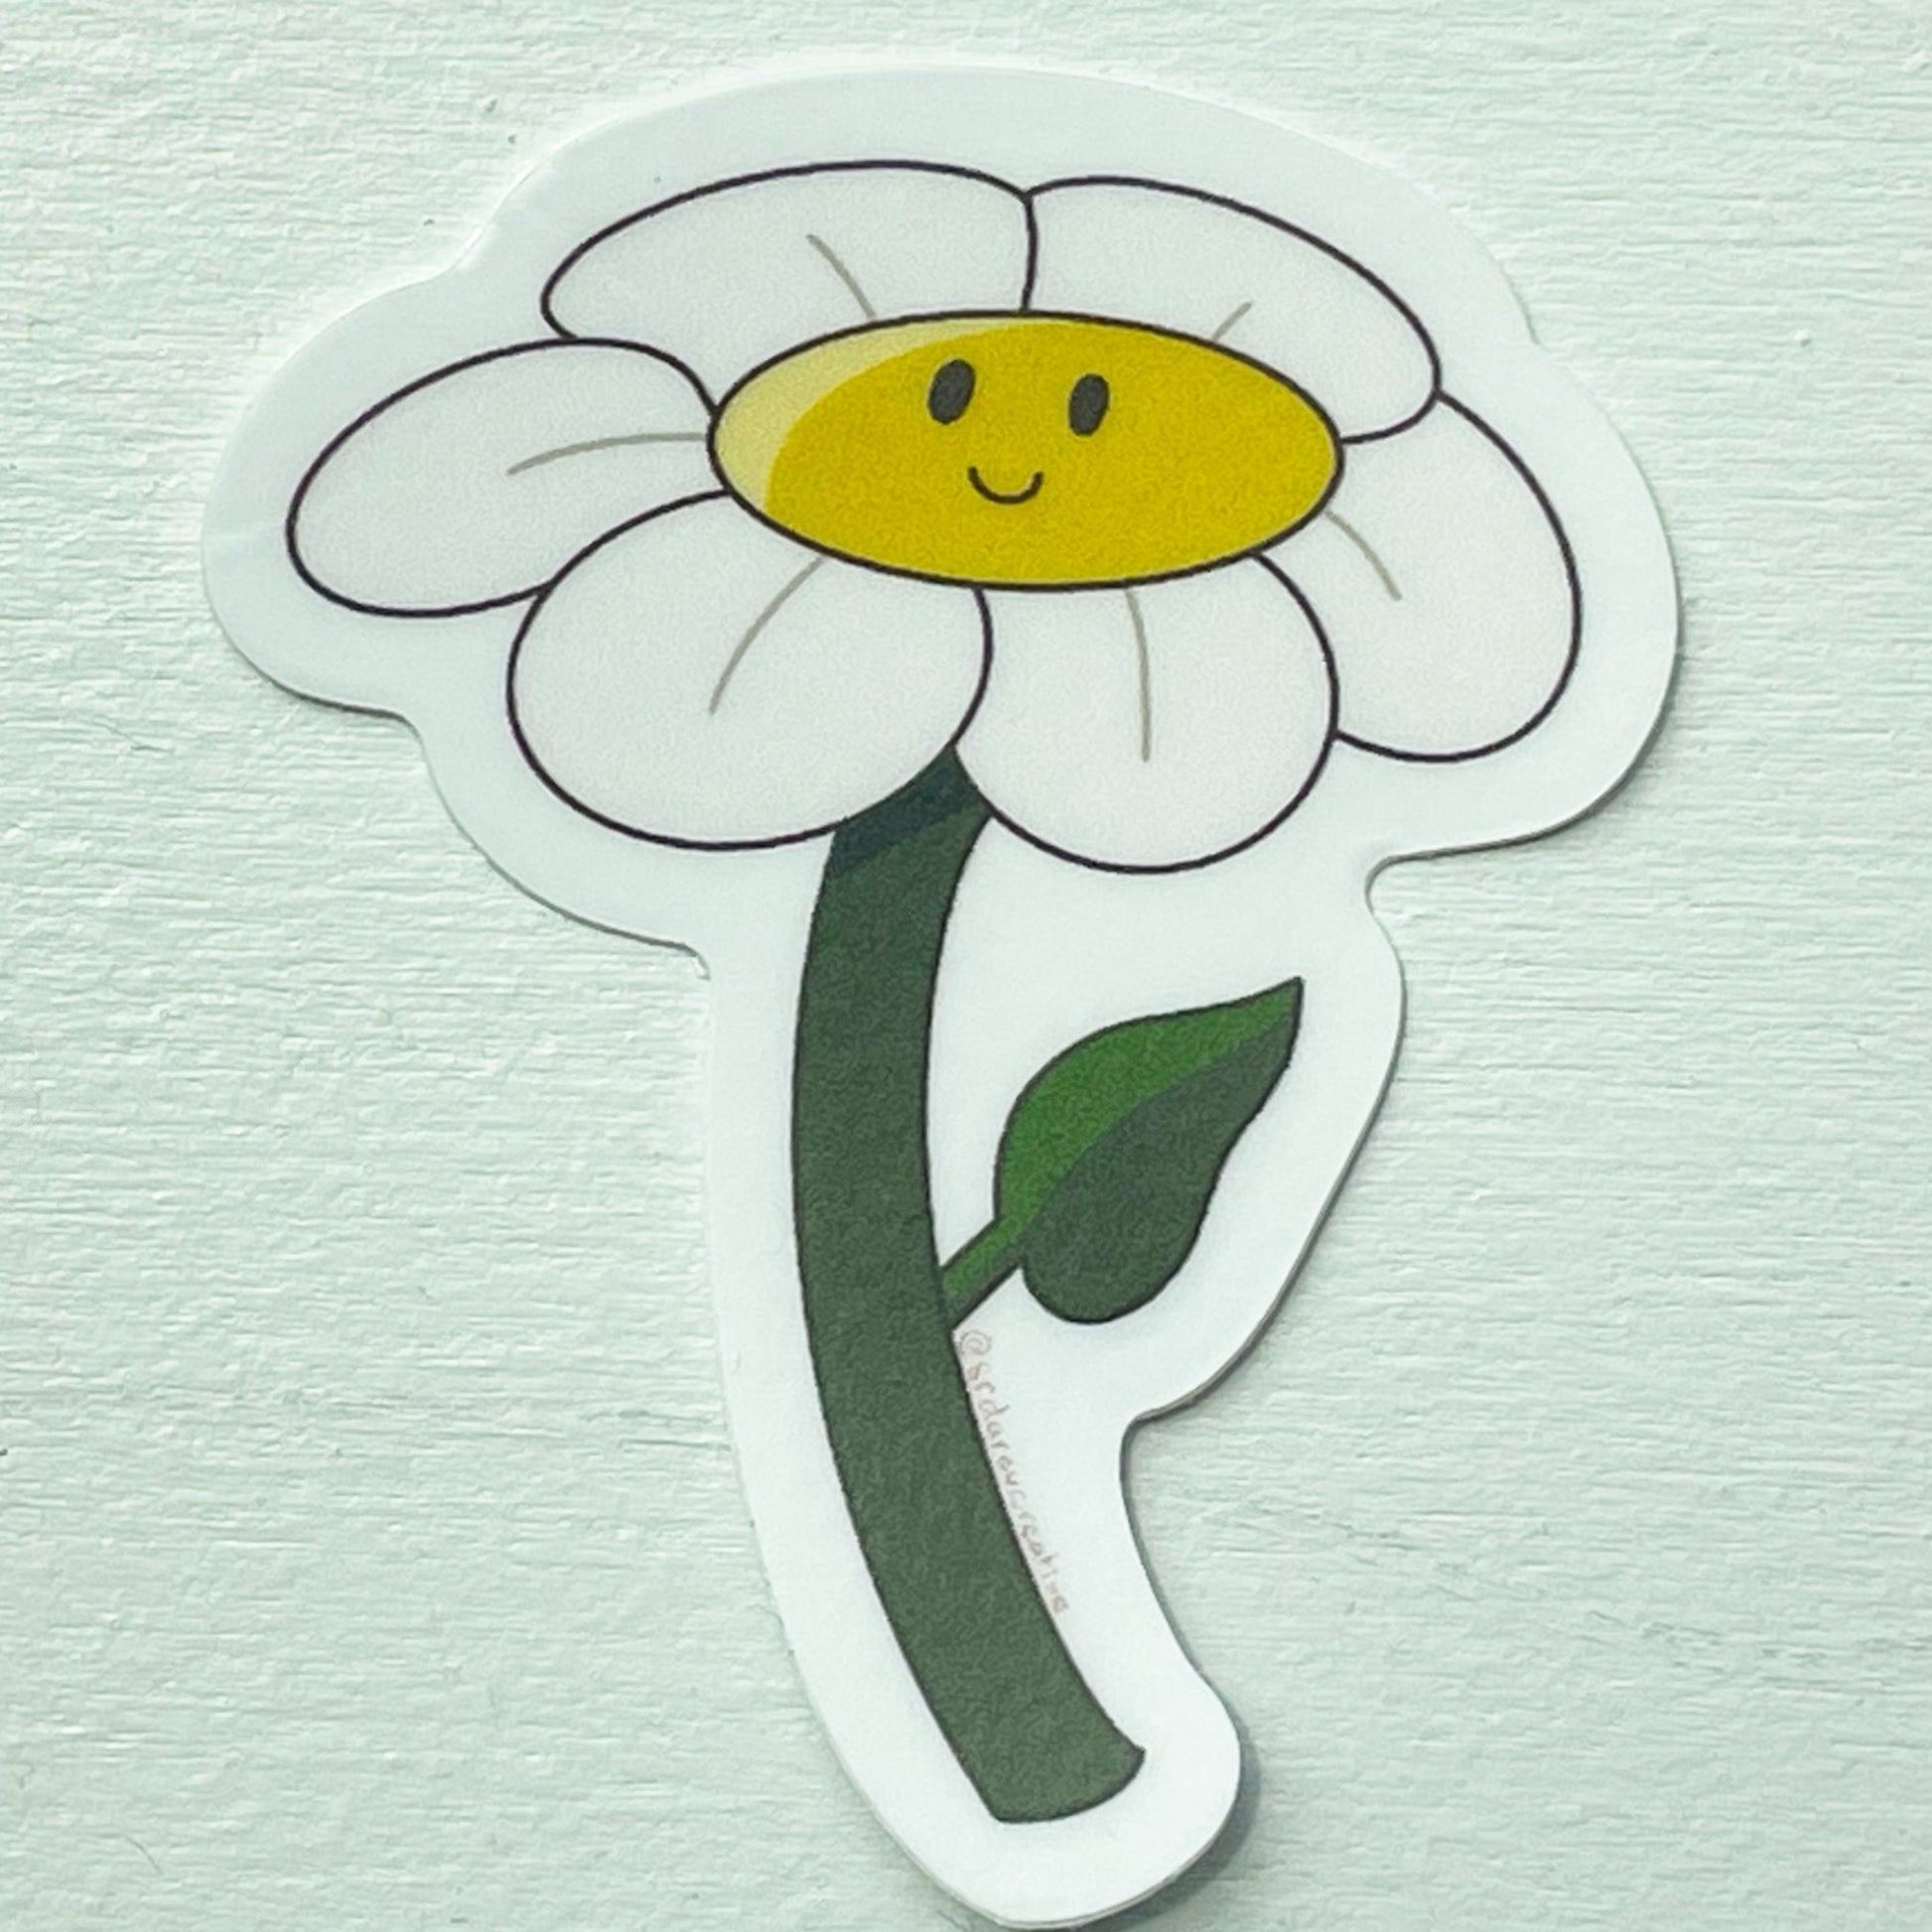 A white background with a flower sticker on top that has white petals, a dark green stem, and a yellow centre with a smiling face.